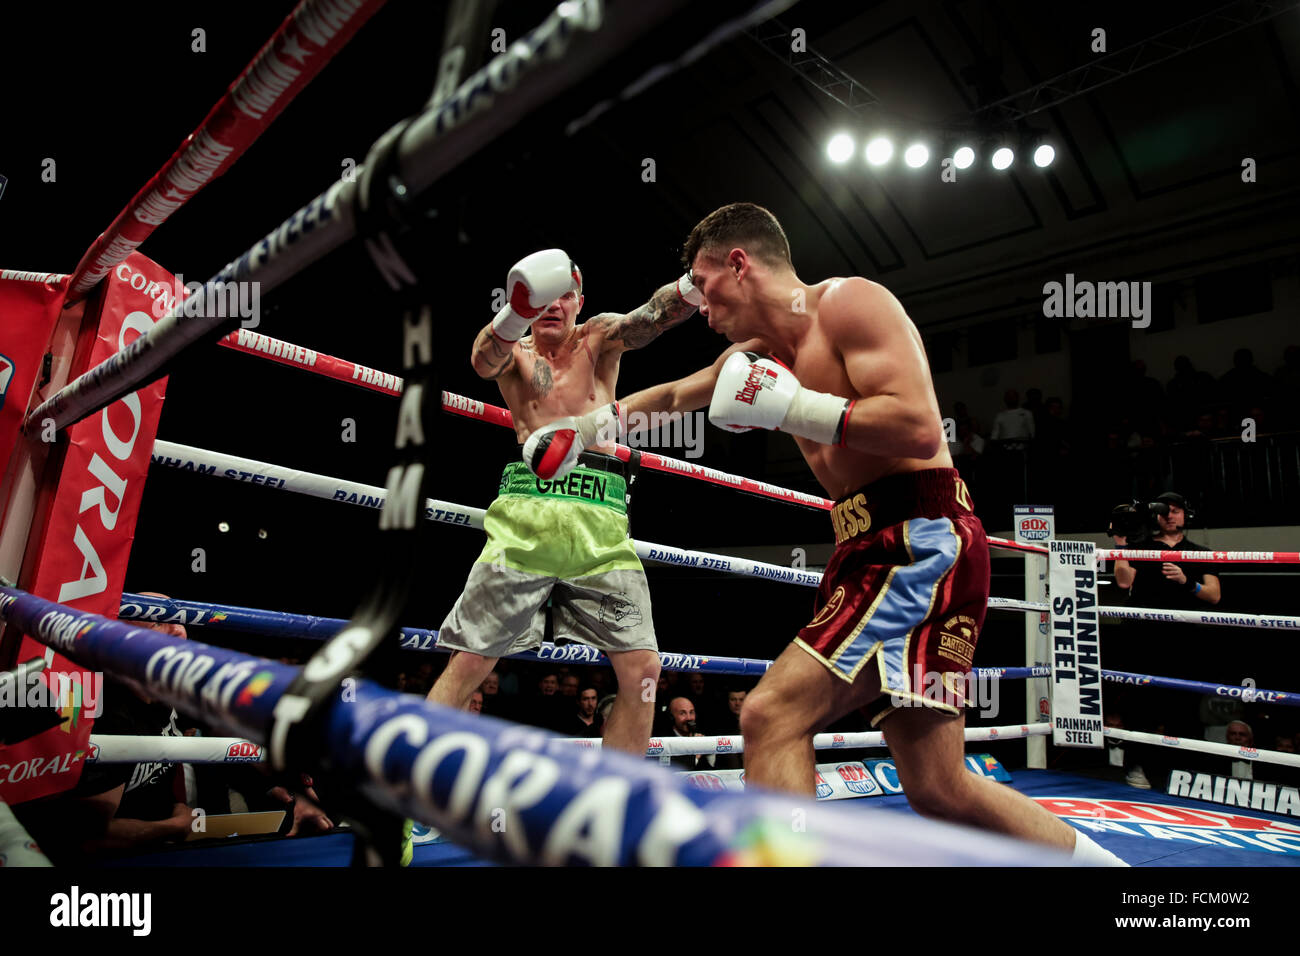 London, UK, 22nd January, 2016. A night of championship boxing at York Hall, England. Sammy Mcness defeats Duane Green in the Super-Welterweight contest. copyright Carol Moir/Alamy Live News Stock Photo